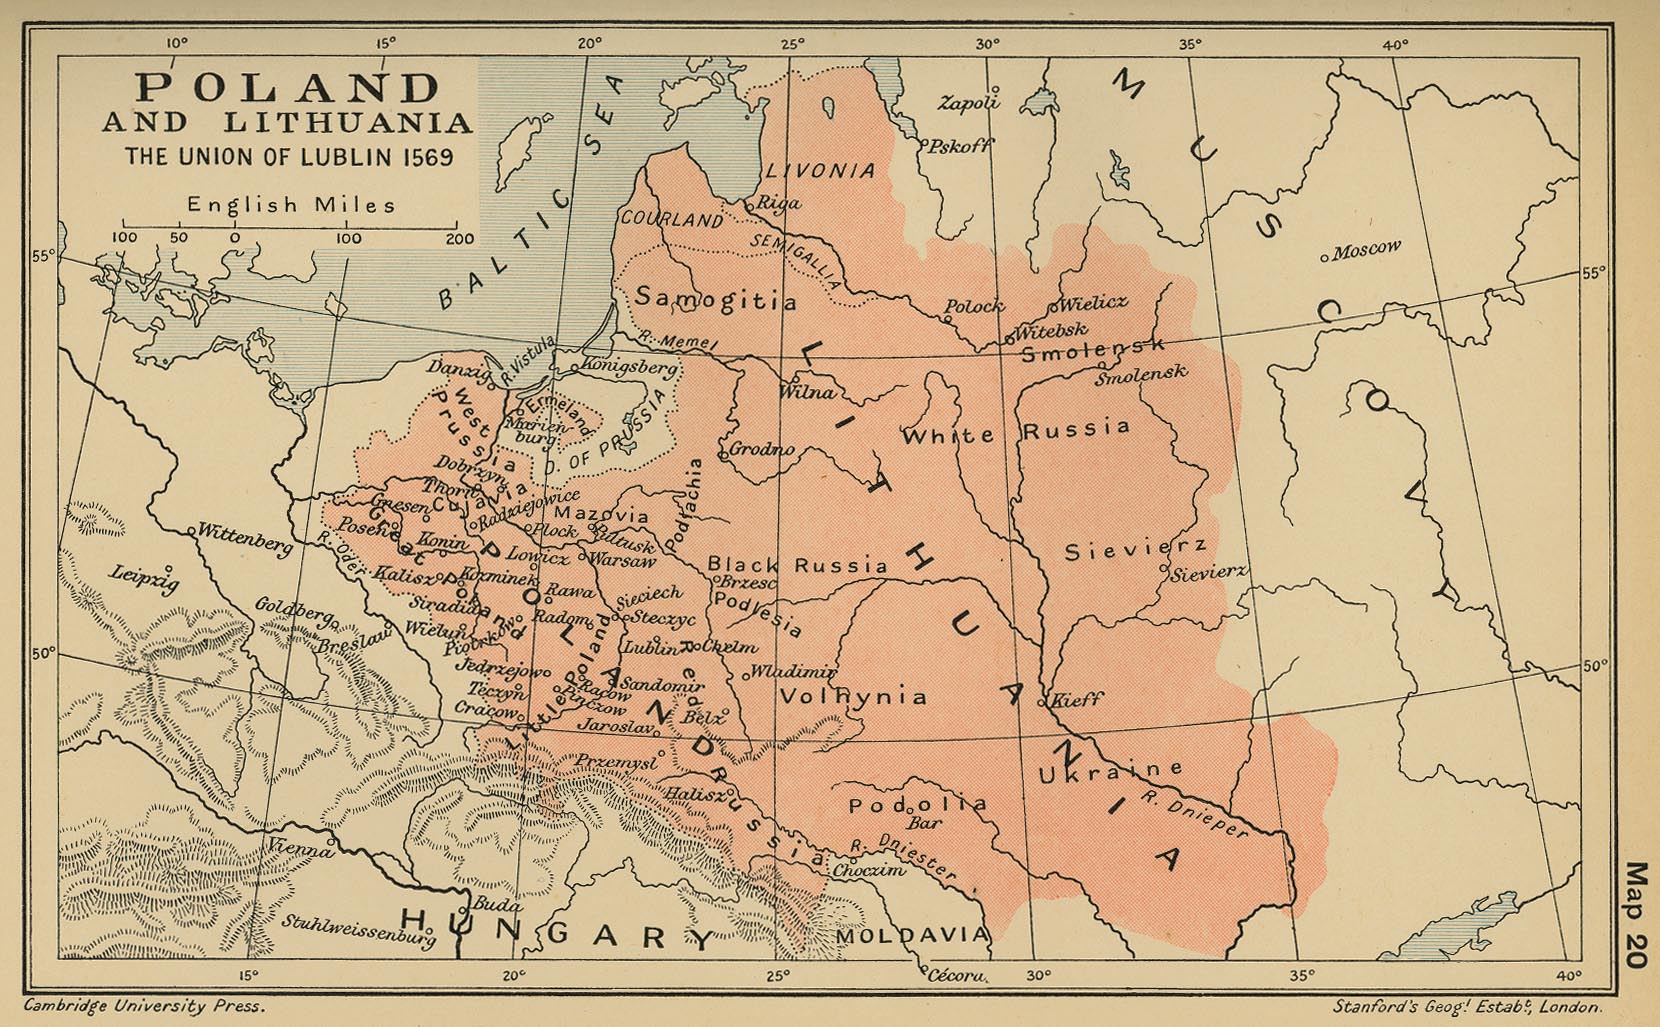 Map of Poland and Lithuania 1569